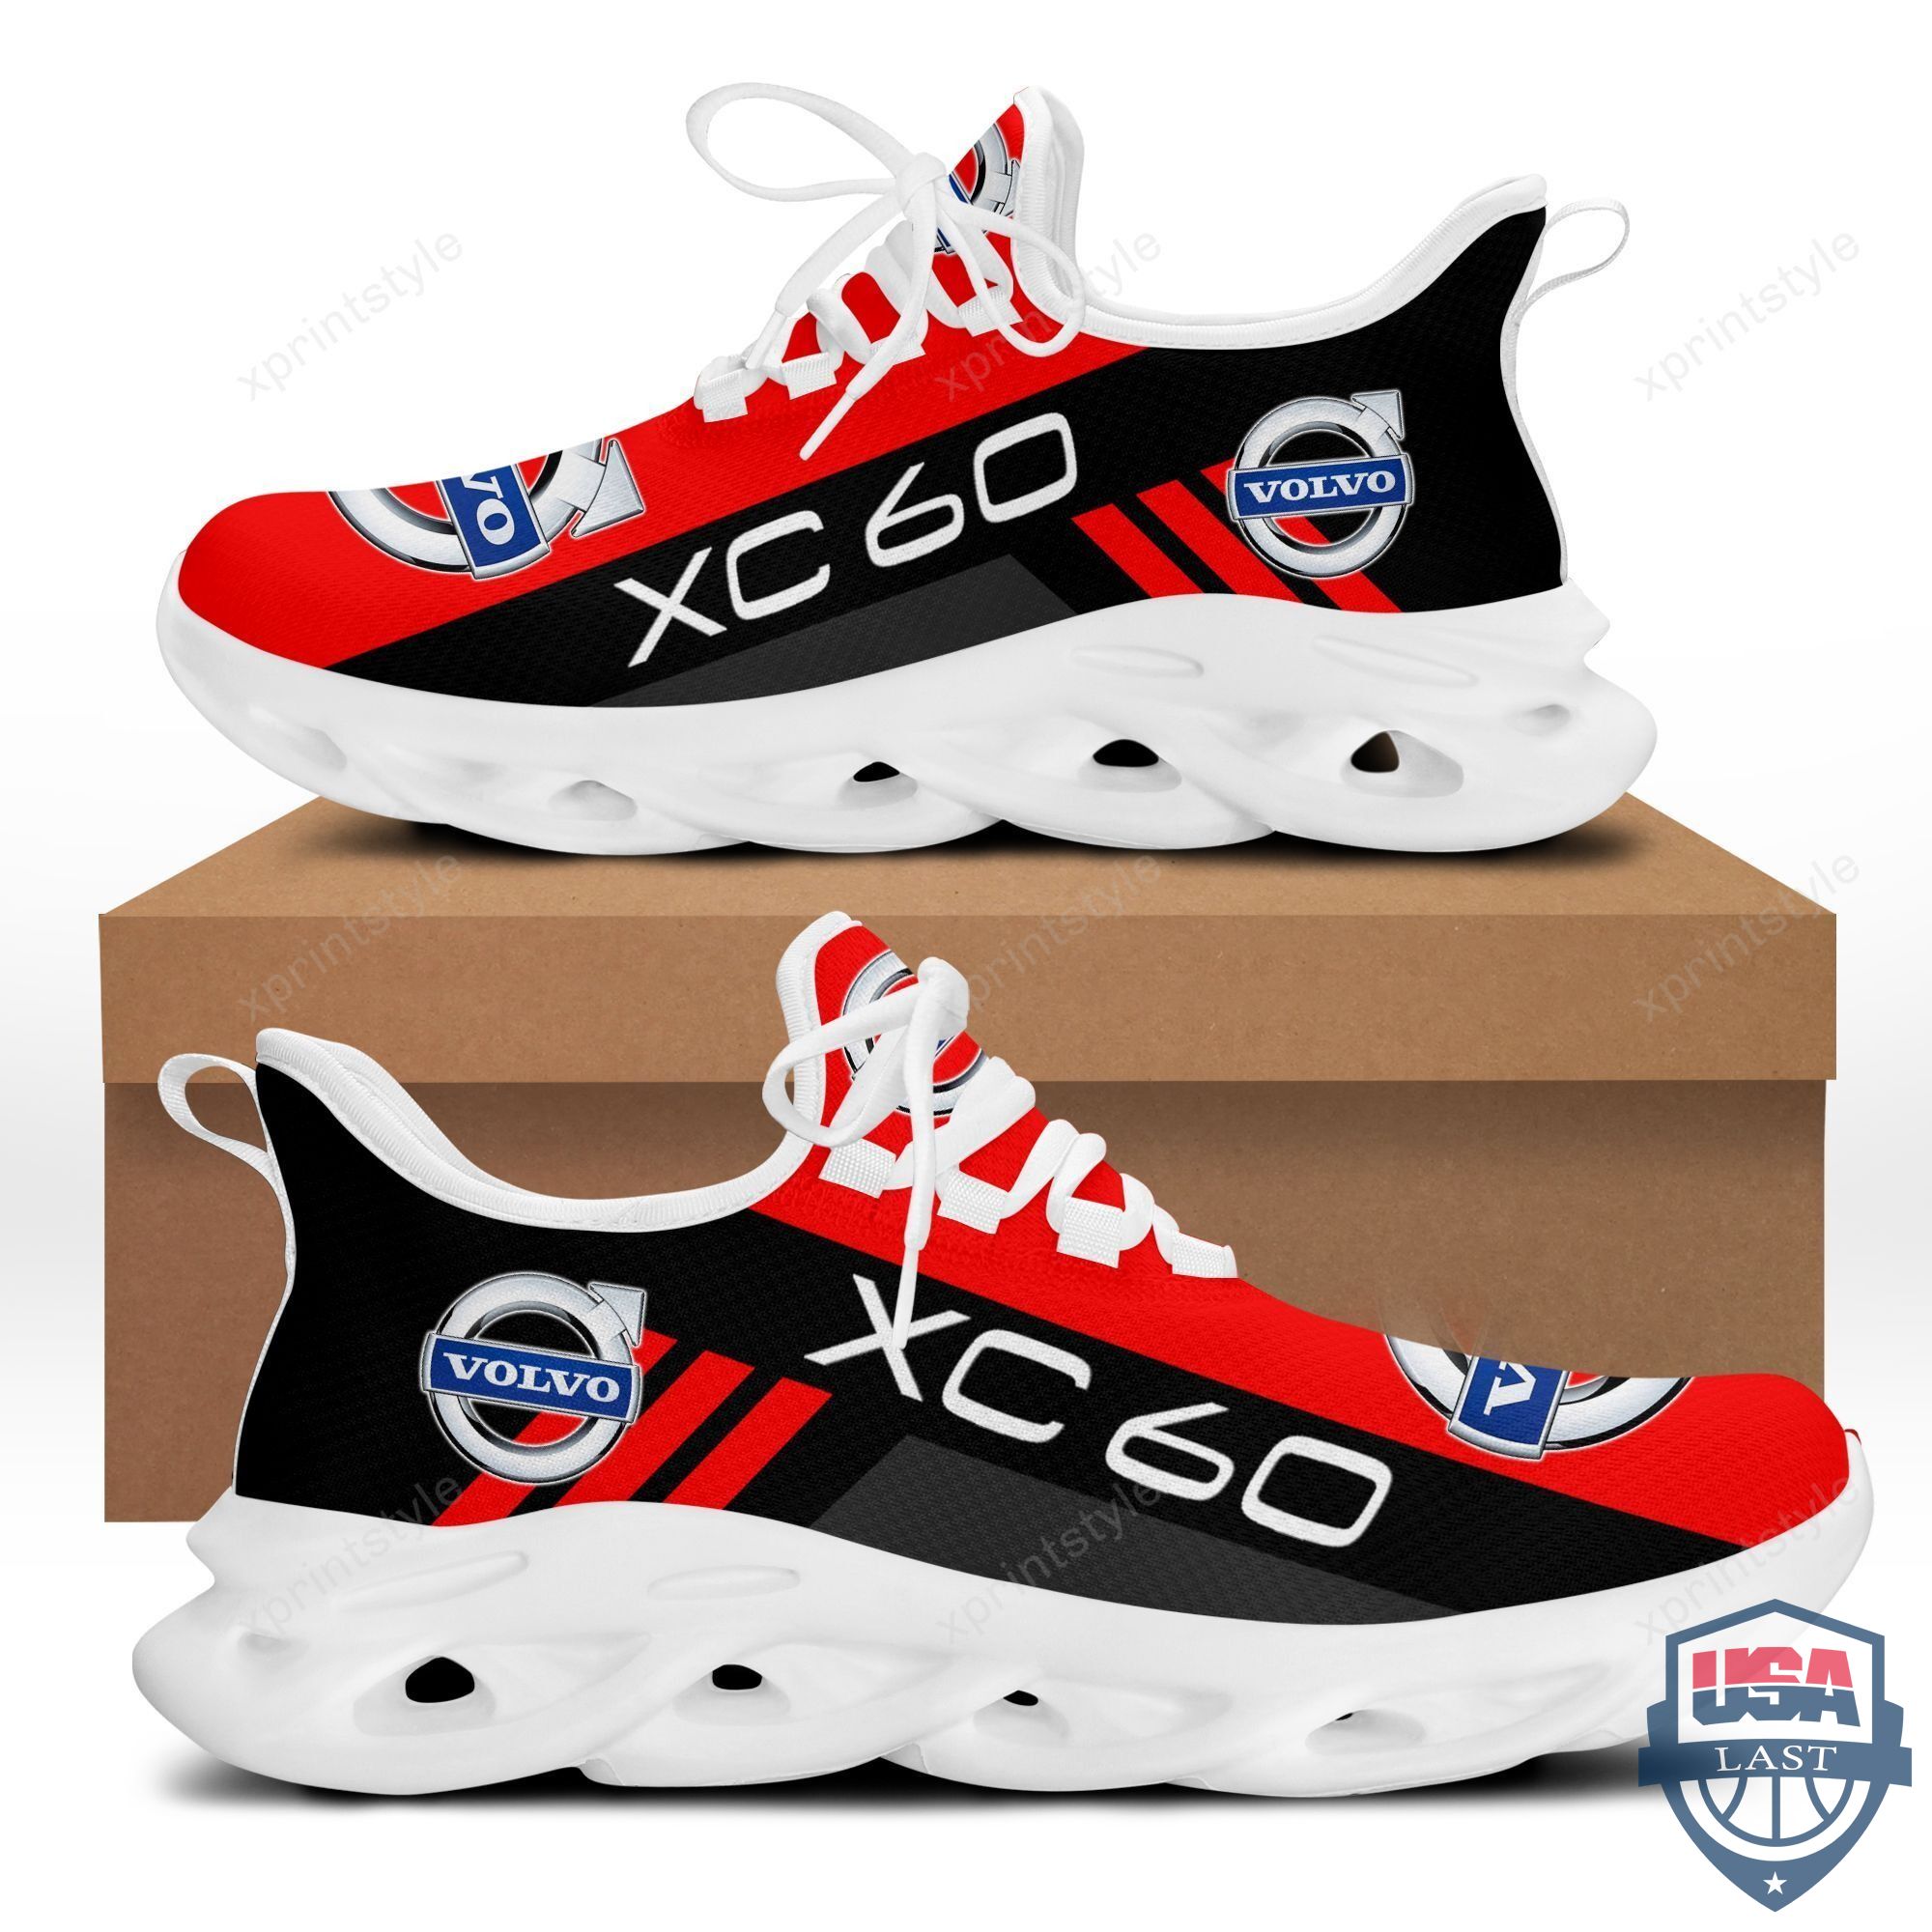 Top Trending – Volvo XC60 Red Max Soul Sneaker Shoes